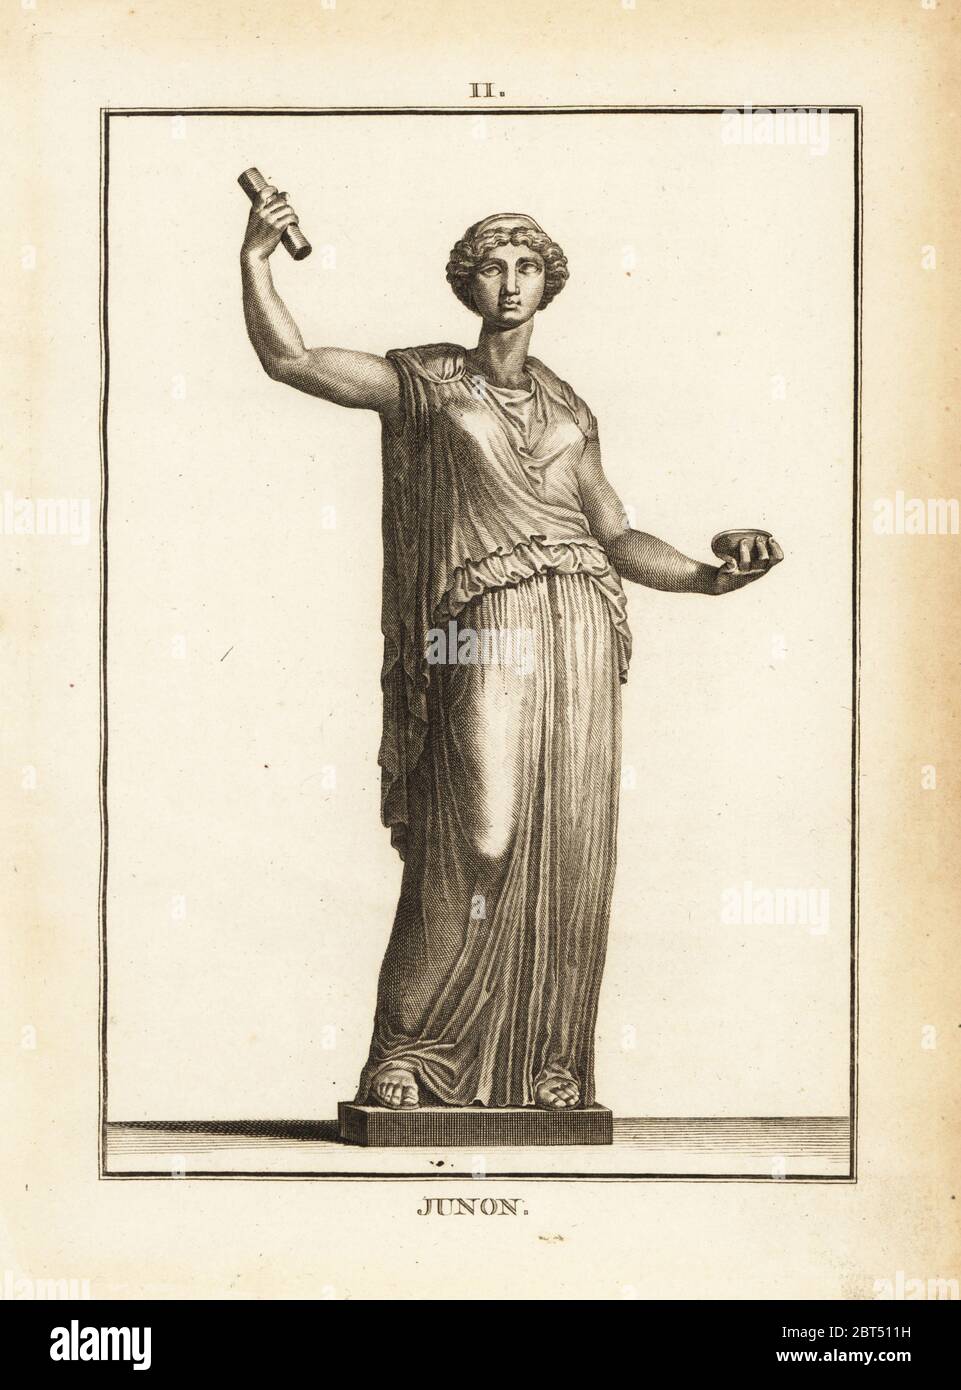 Statue of the Roman goddess Juno, queen of the gods. Copperplate engraving by Francois-Anne David from Museum de Florence, ou Collection des Pierres Gravees, Statues, Medailles, Chez F.A. David, Paris, 1787. David (1741-1824) drew and engraved the illustrations based on Roman statues, engraved stones and medals in the collection of the Museum de Florence and the cabinet of curiosities of the Grand Duke of Tuscany. Stock Photo